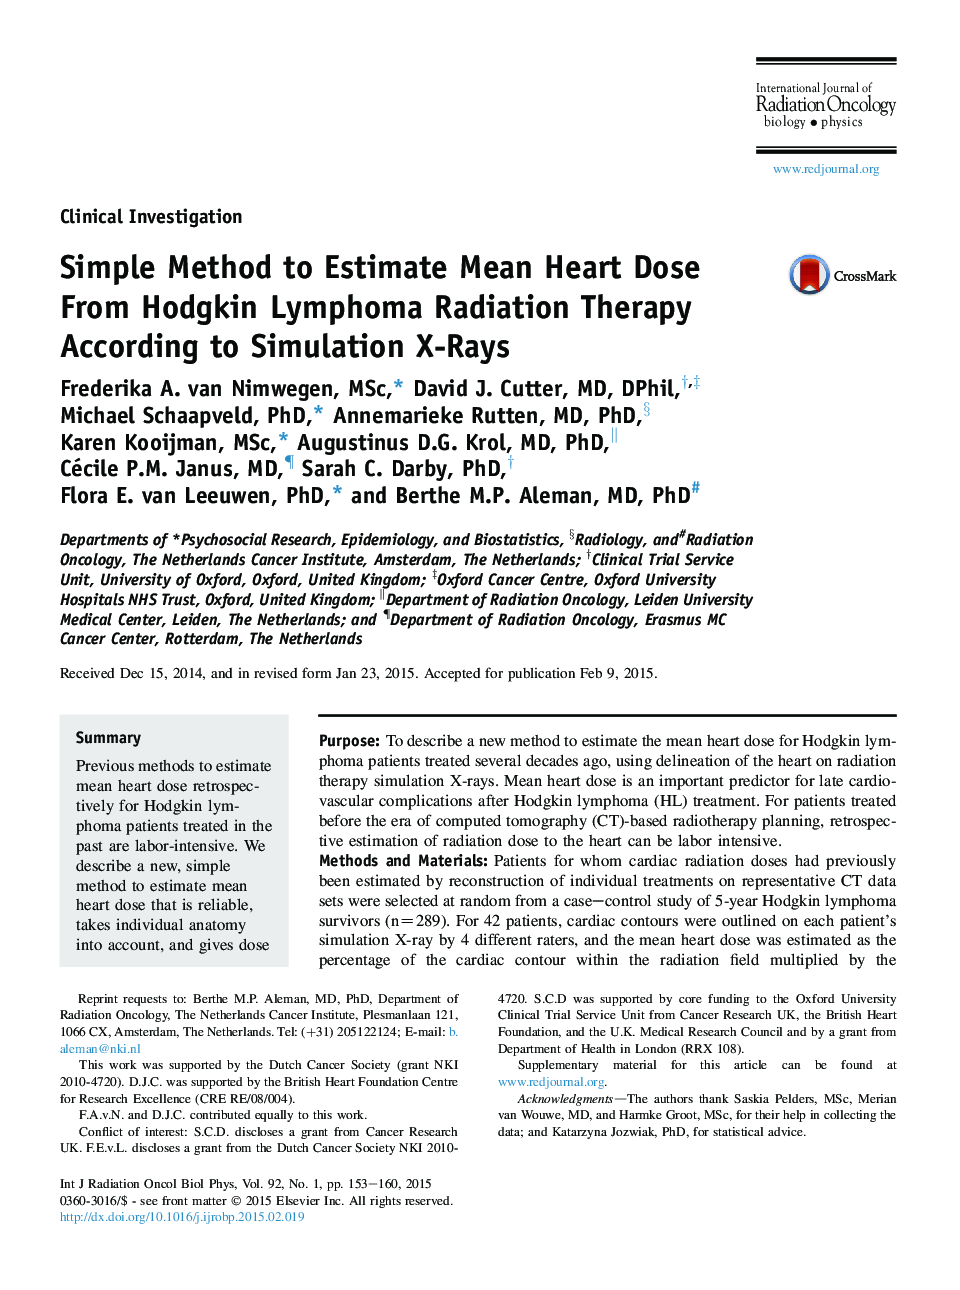 Simple Method to Estimate Mean Heart Dose From Hodgkin Lymphoma Radiation Therapy According to Simulation X-Rays